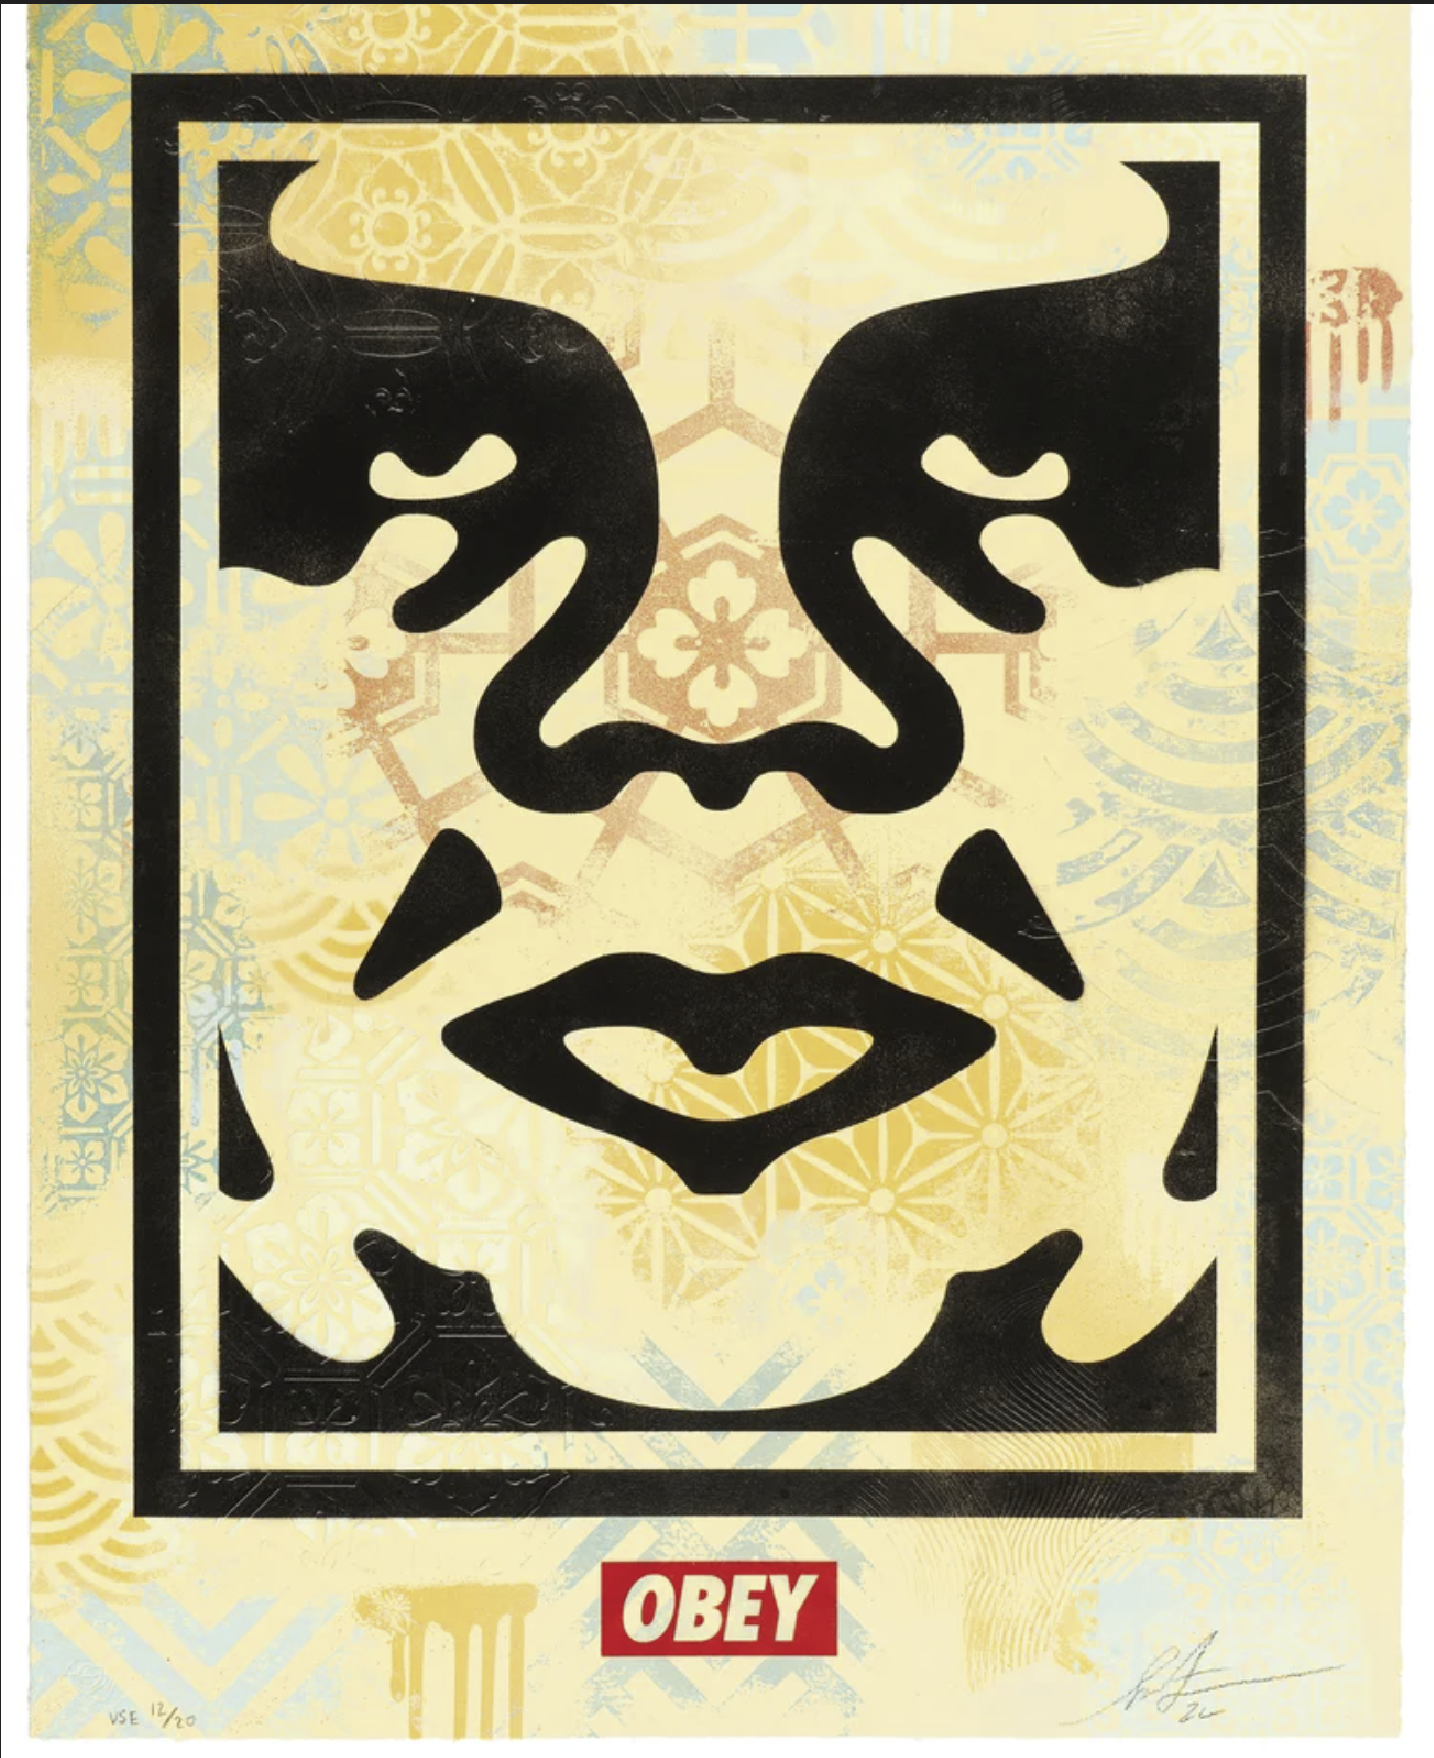 OBEY Giant x Beyond the Streets x Montana Cans